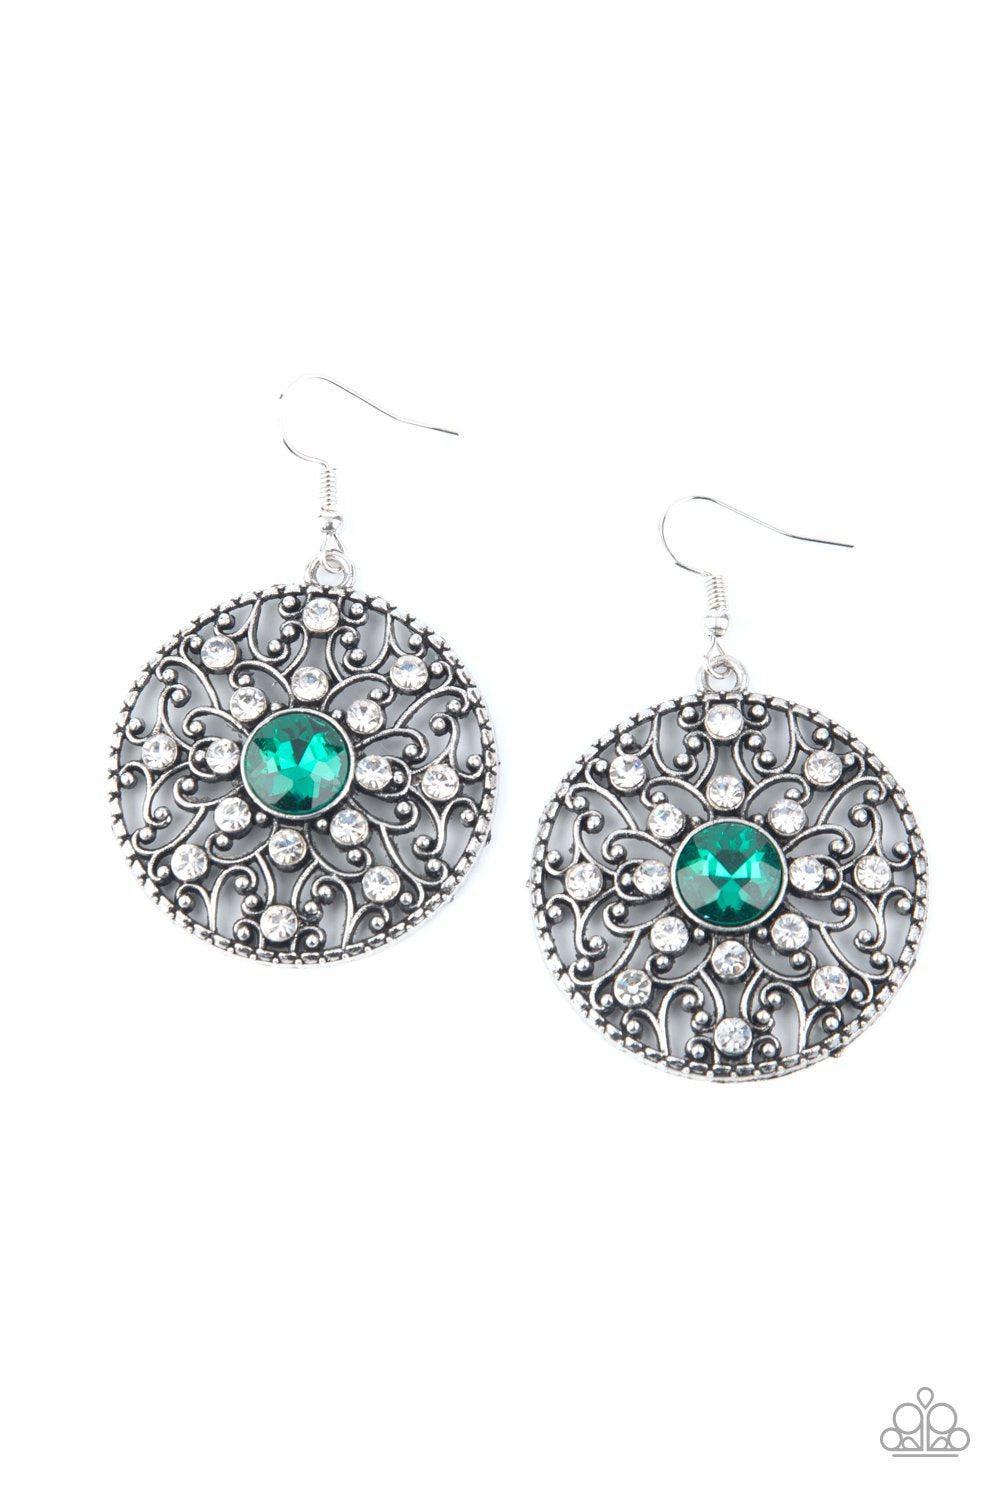 GLOW Your True Colors Green and White Rhinestone Earrings - Paparazzi Accessories - lightbox -CarasShop.com - $5 Jewelry by Cara Jewels